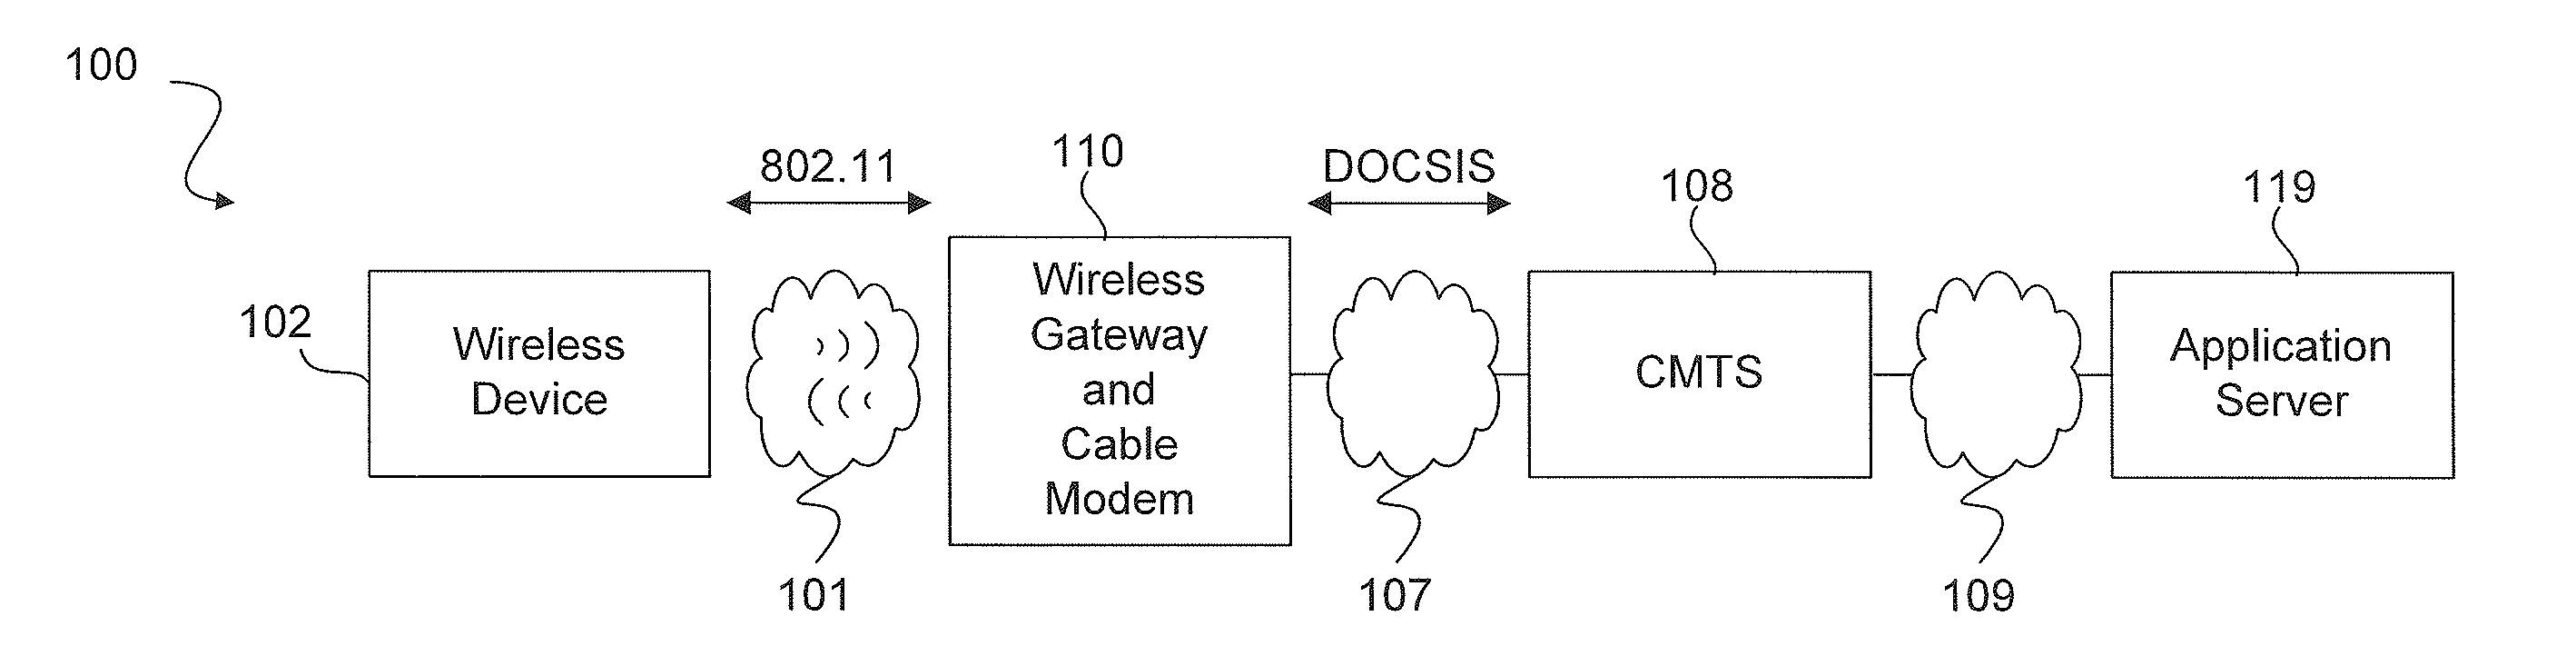 Dynamic quality of service (QOS) setup over wired and wireless networks